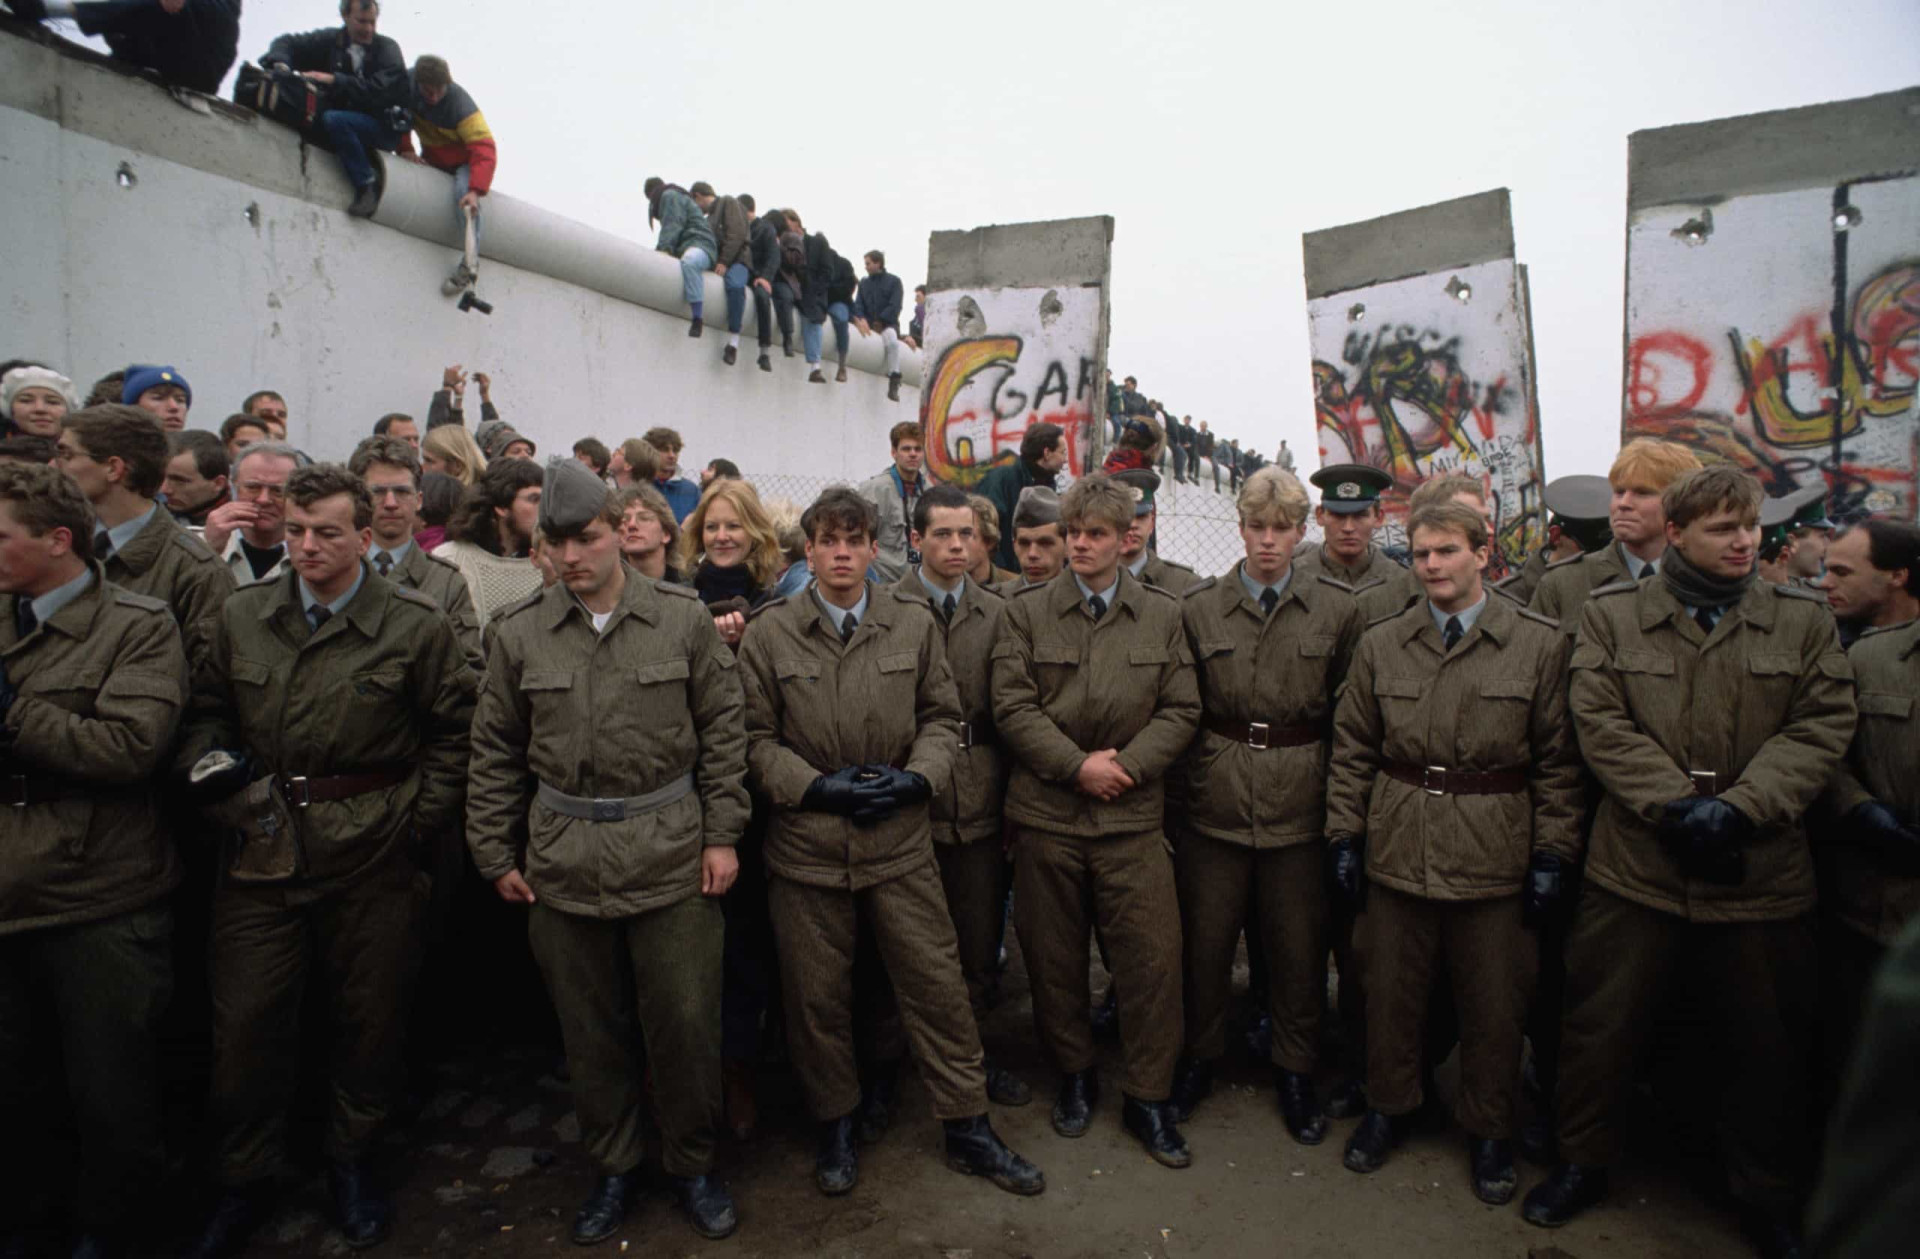 <p>The fall of the Berlin Wall on November 1990 and the Iron Curtain, along with the reunification of Germany, sees the beginning of the end of the Cold War.</p><p><a href="https://www.msn.com/en-ca/community/channel/vid-7xx8mnucu55yw63we9va2gwr7uihbxwc68fxqp25x6tg4ftibpra?cvid=94631541bc0f4f89bfd59158d696ad7e">Follow us and access great exclusive content every day</a></p>